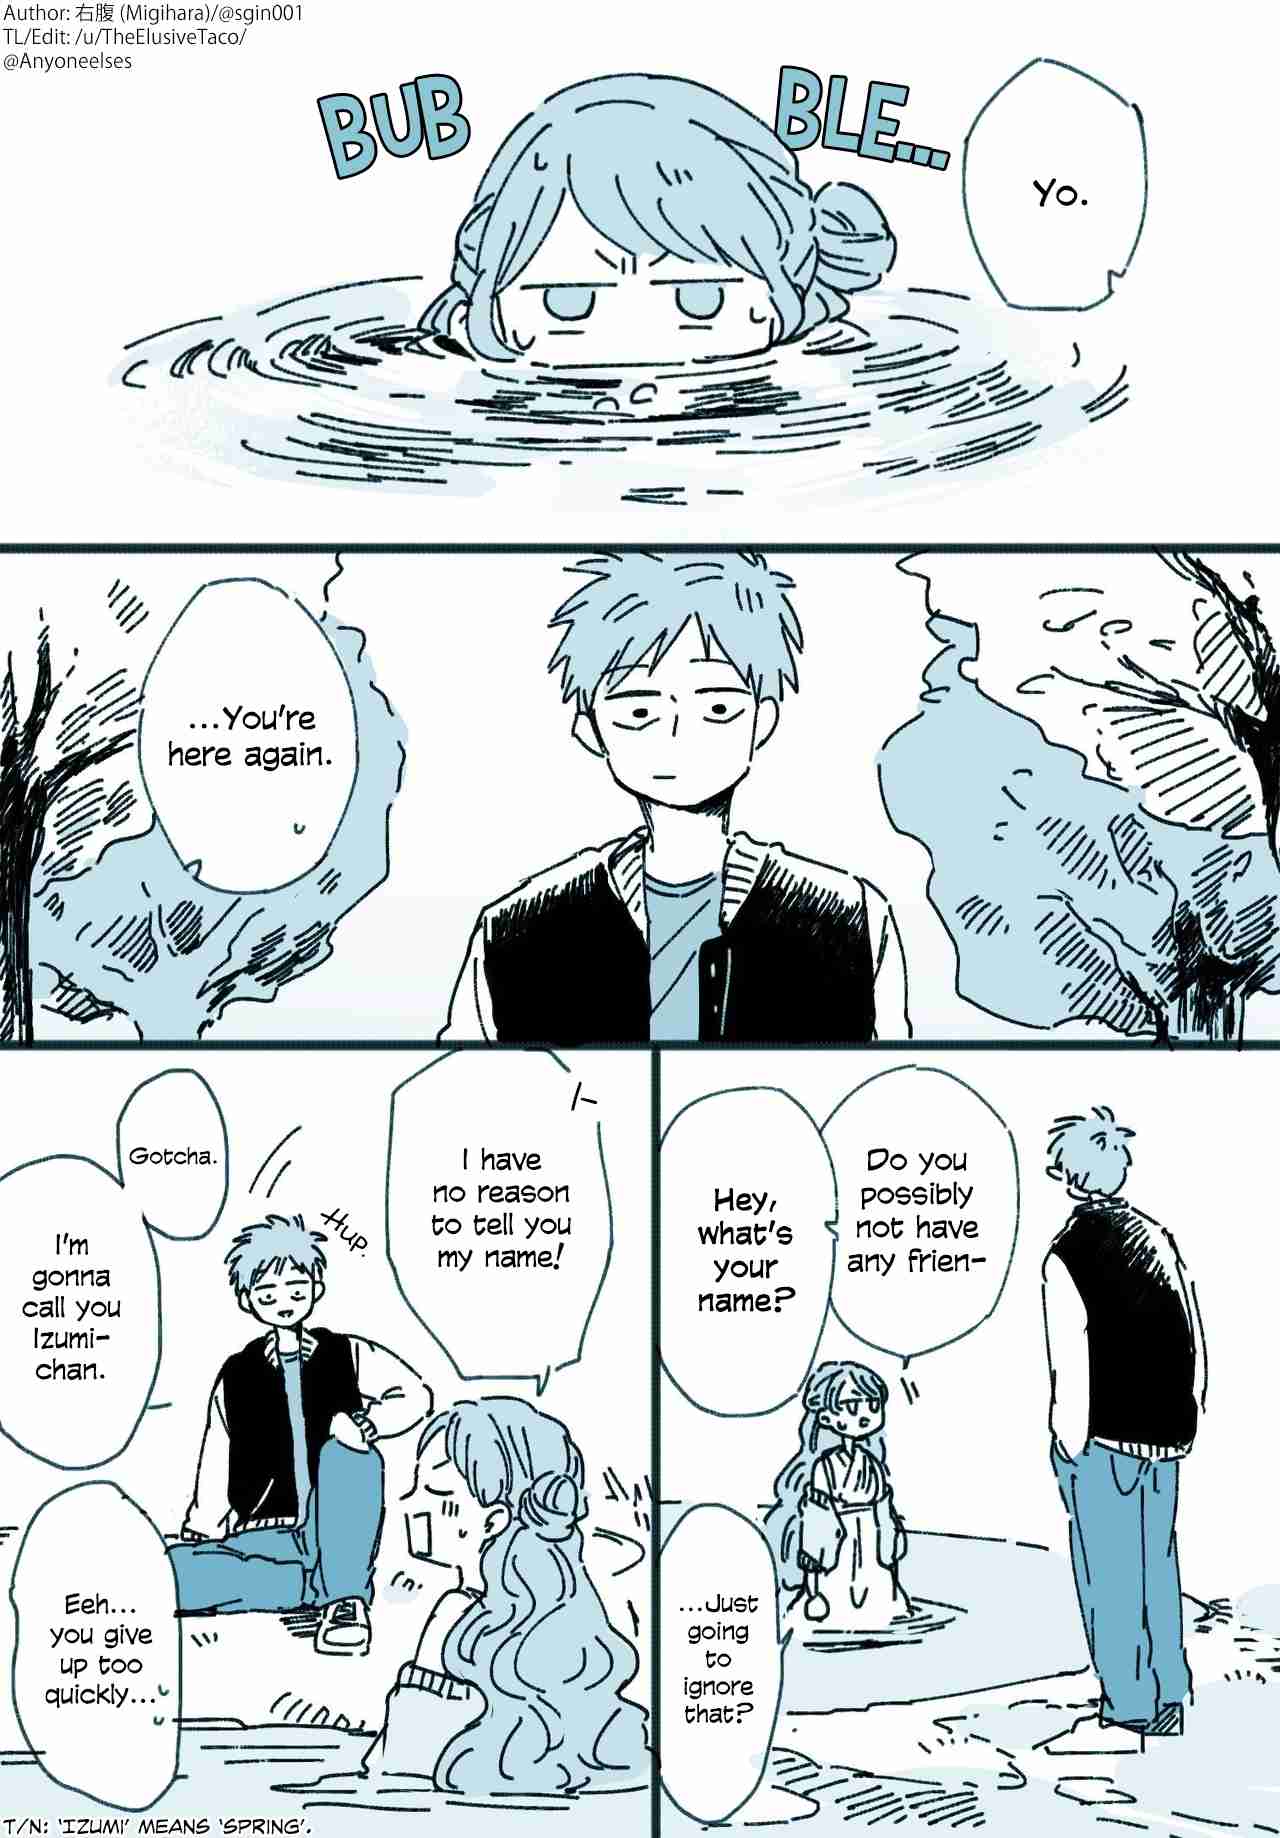 Migihara's Short Manga The Lonely Spirit of the Spring (Part 3)